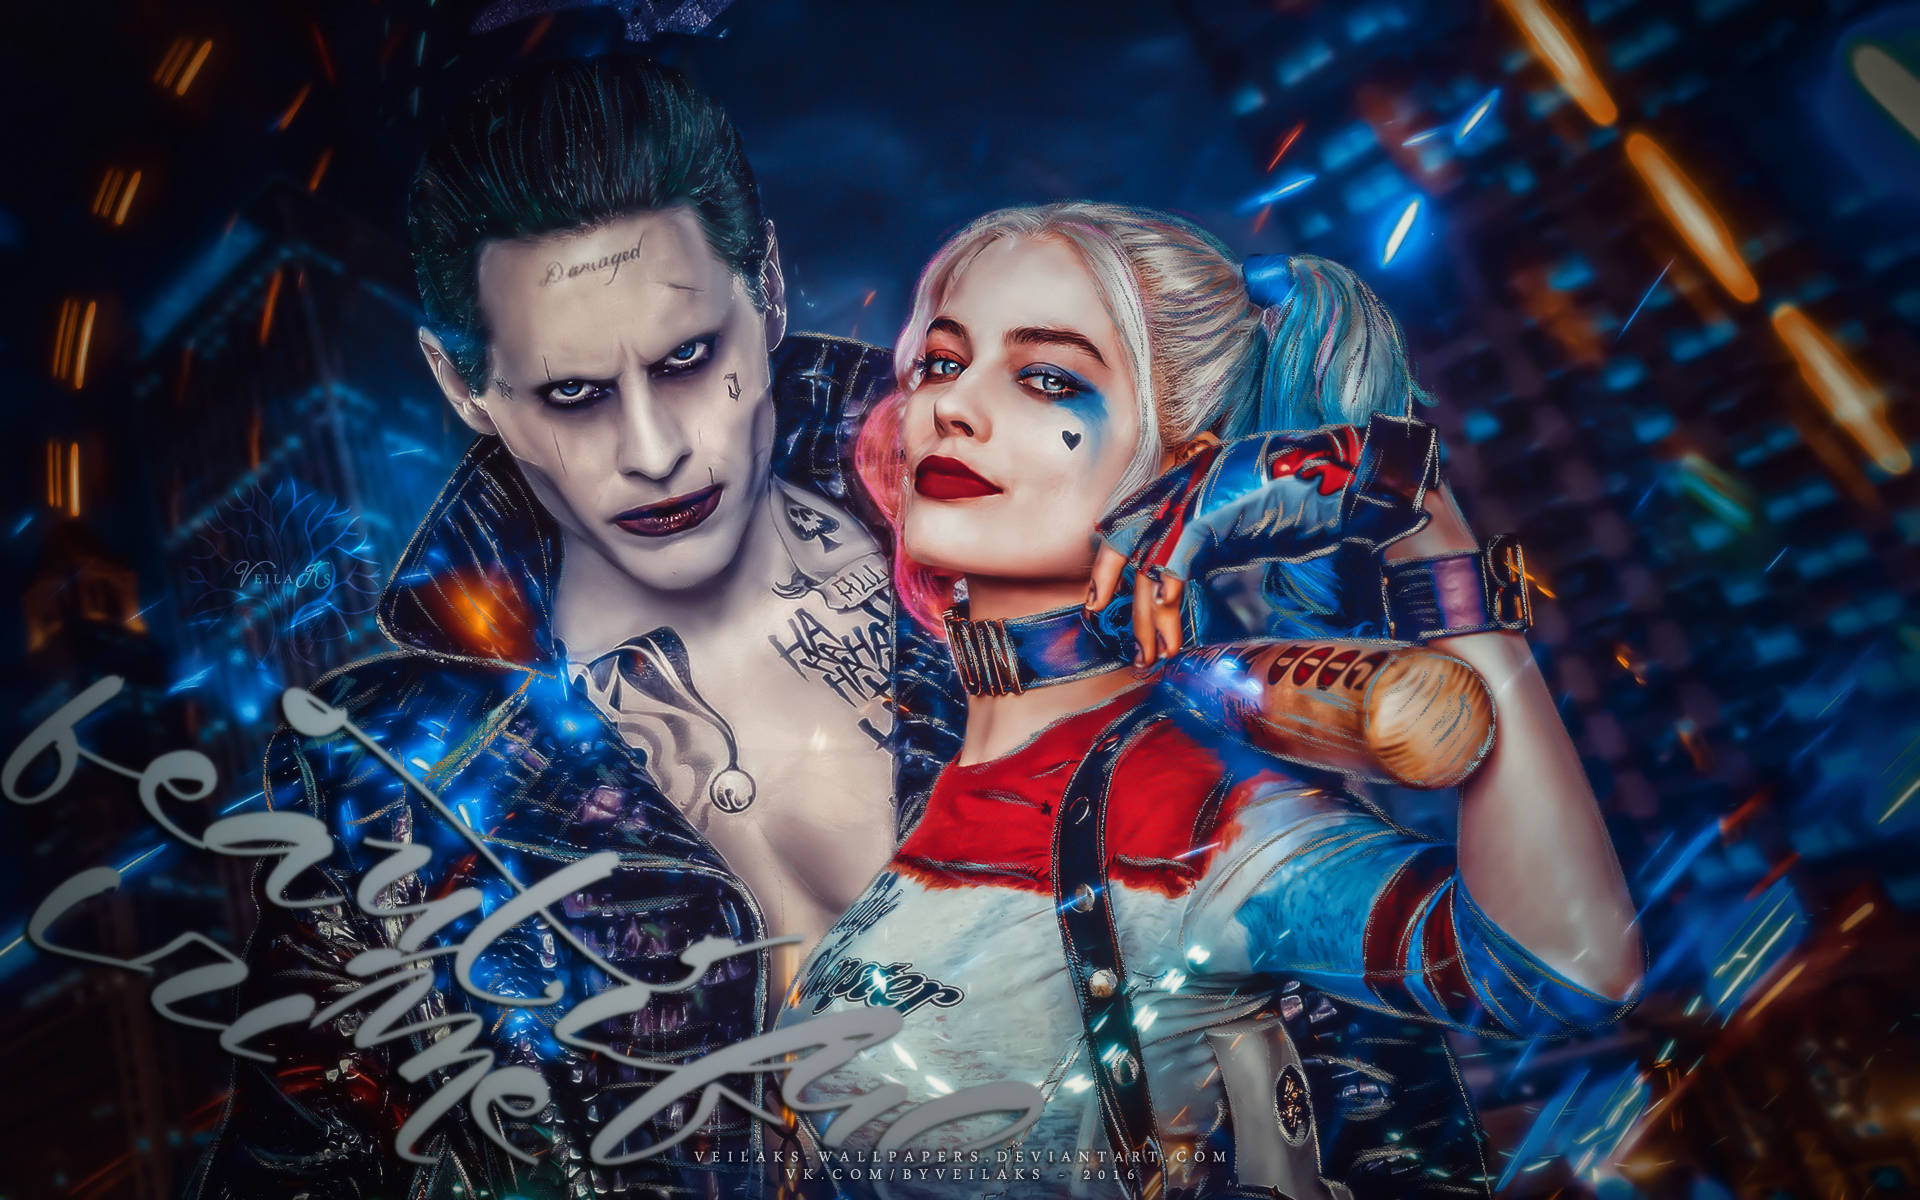 Prepare For Action: Deadshot And Harley Quinn From Suicide Squad Background